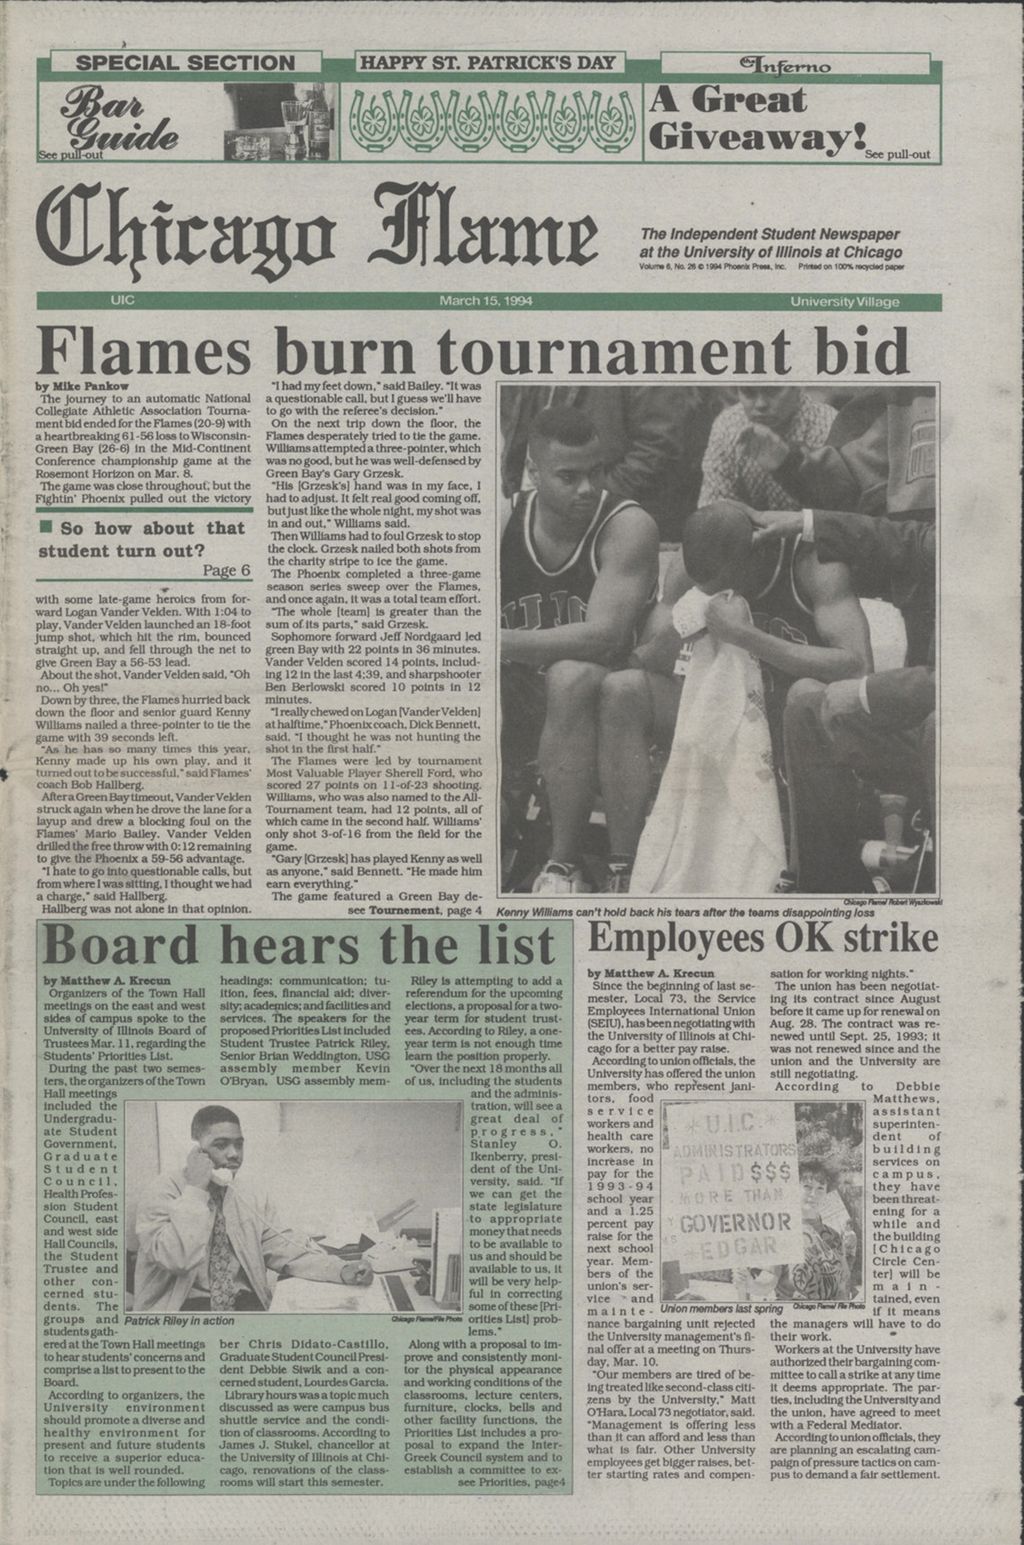 Chicago Flame (March 15, 1994)